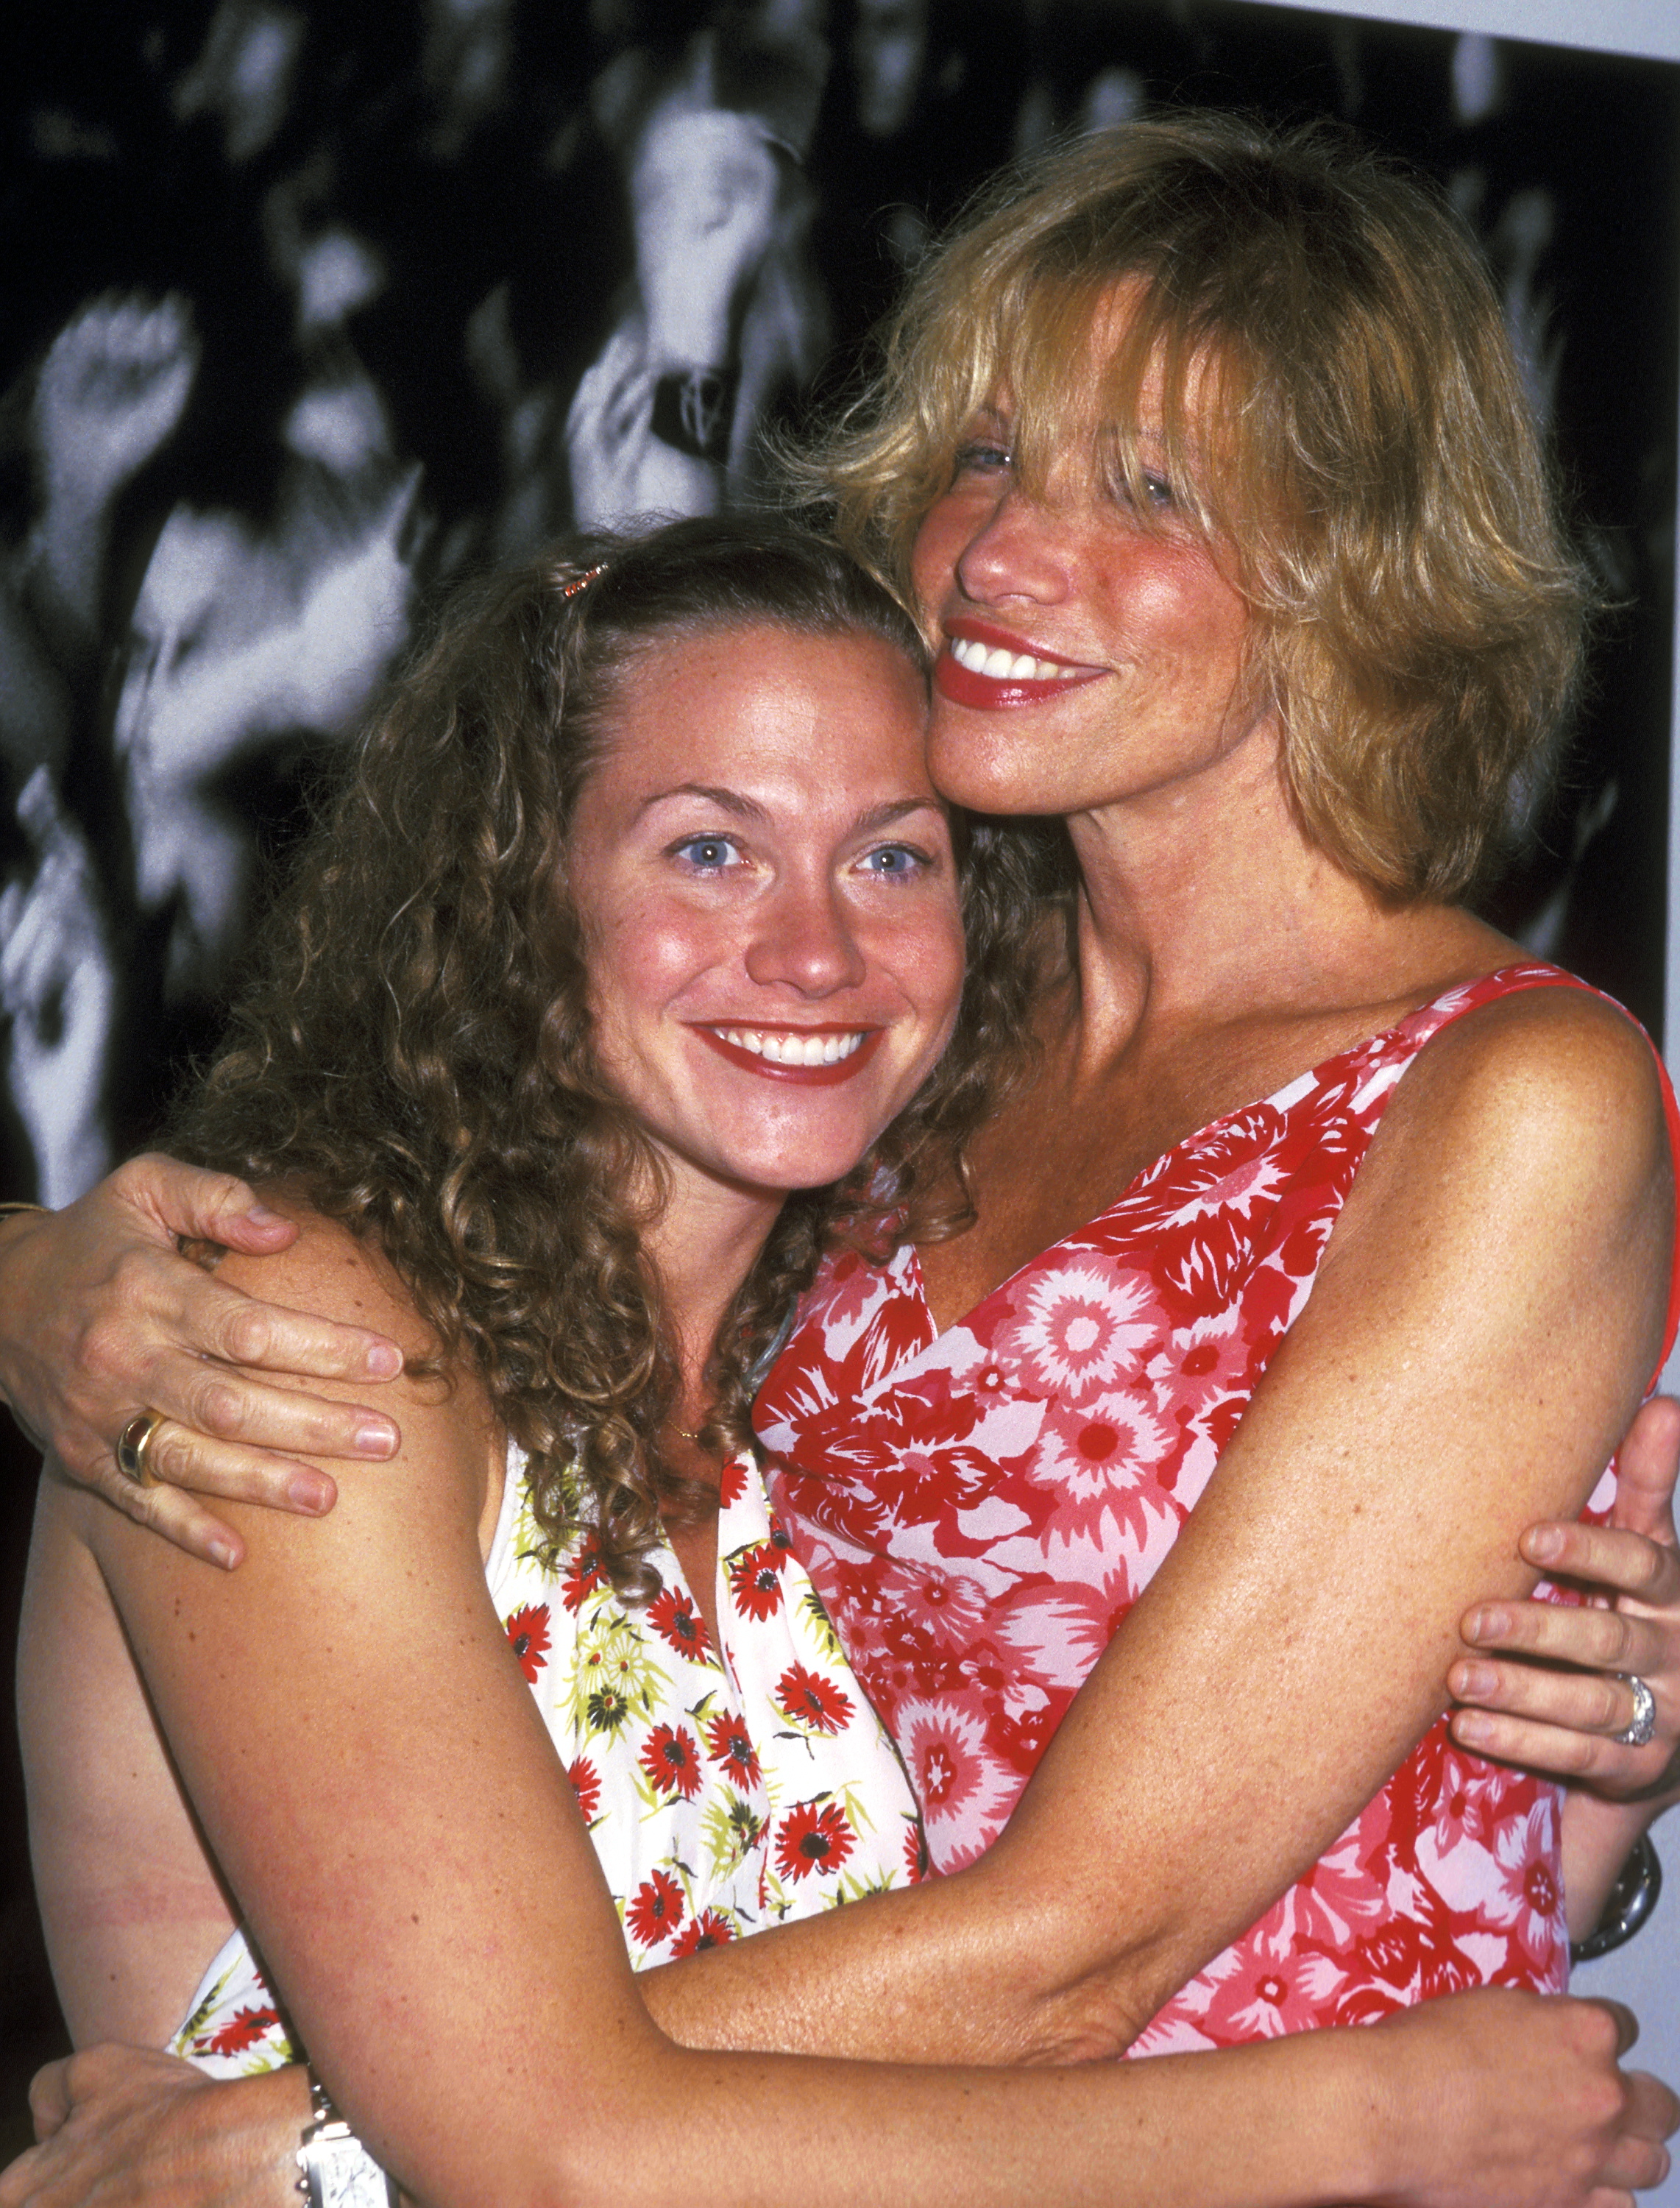 Musician Carly Simon and daughter Sally Taylor attend the cocktail party to celebrate Melissa Auf der Maur's photo exhibiton "The Kids Are Alright" on July 24, 2002, at Sotheby's in New York City. | Source: Getty Images